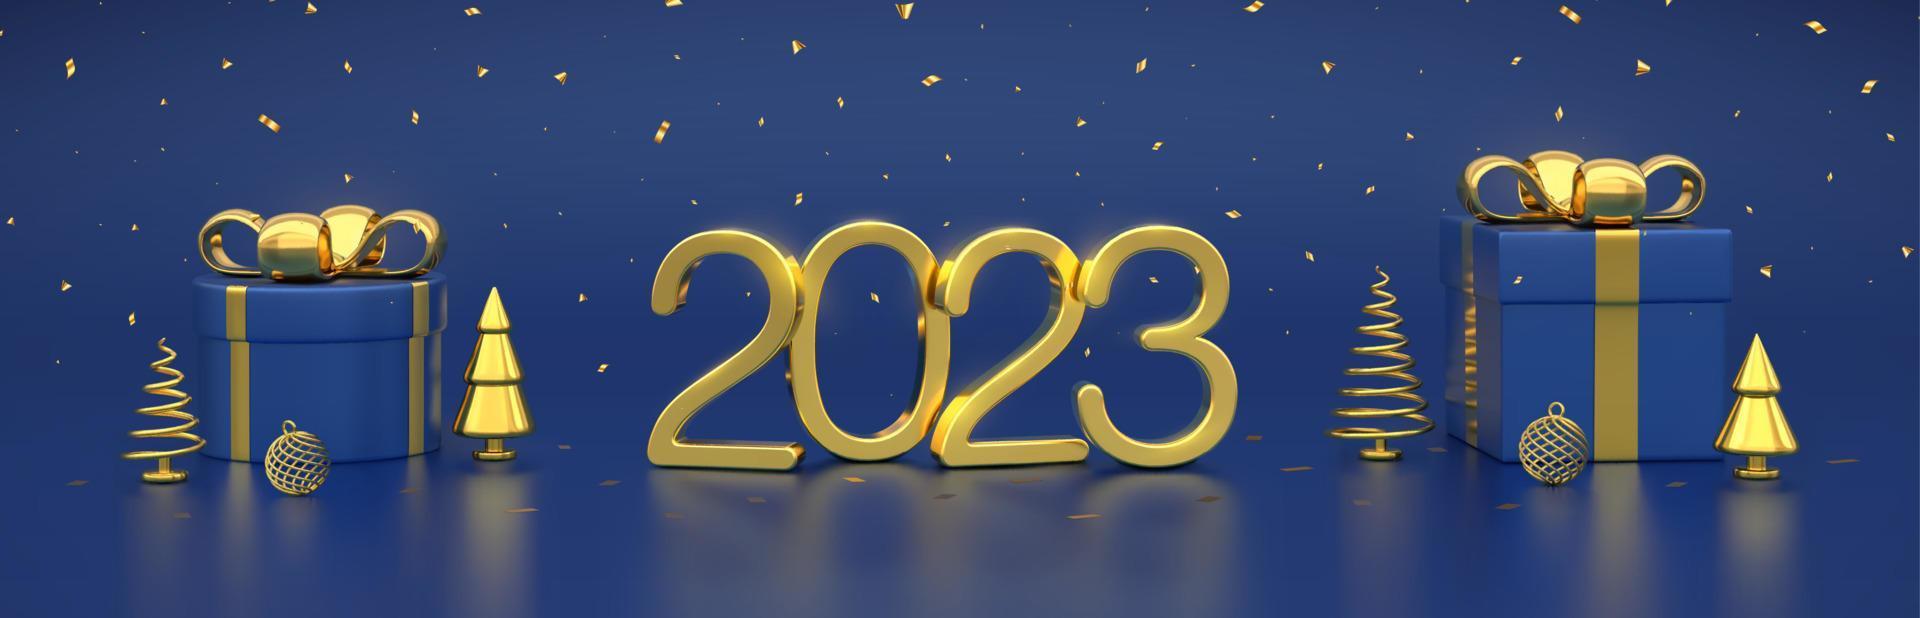 Happy New 2023 Year. 3D Golden metallic numbers 2023 with gift boxes, gold metallic cone shape pine, spruce trees, balls, confetti on blue background. Xmas banner, header, footer. Vector illustration.